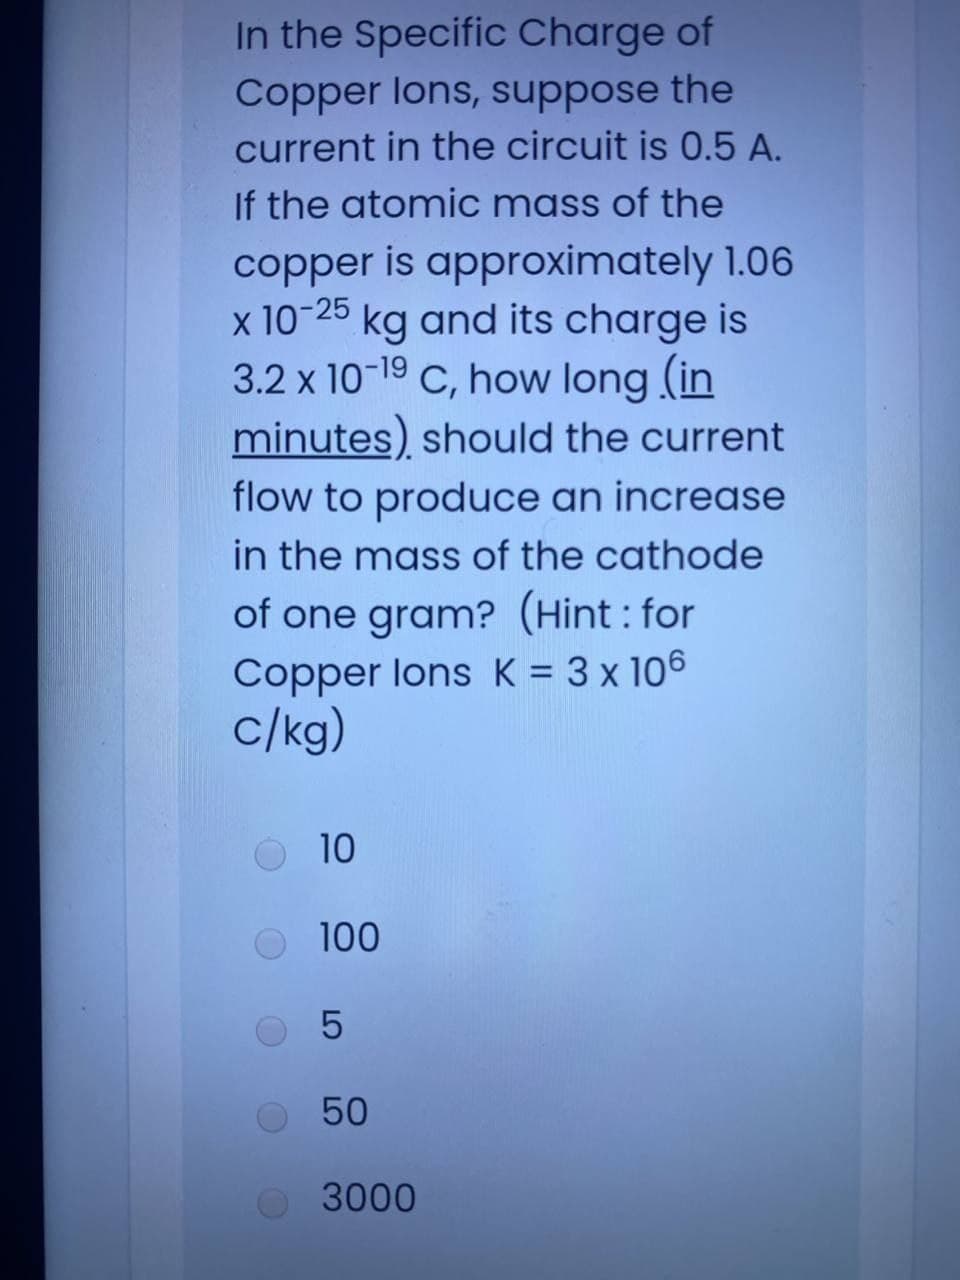 In the Specific Charge of
Copper lons, suppose the
current in the circuit is 0.5 A.
If the atomic mass of the
copper is approximately 1.06
x 10-25 kg and its charge is
3.2 x 10-19 C, how long (in
minutes) should the current
flow to produce an increase
in the mass of the cathode
of one gram? (Hint : for
Copper lons K = 3 x 106
c/kg)
%3D
10
100
50
3000
